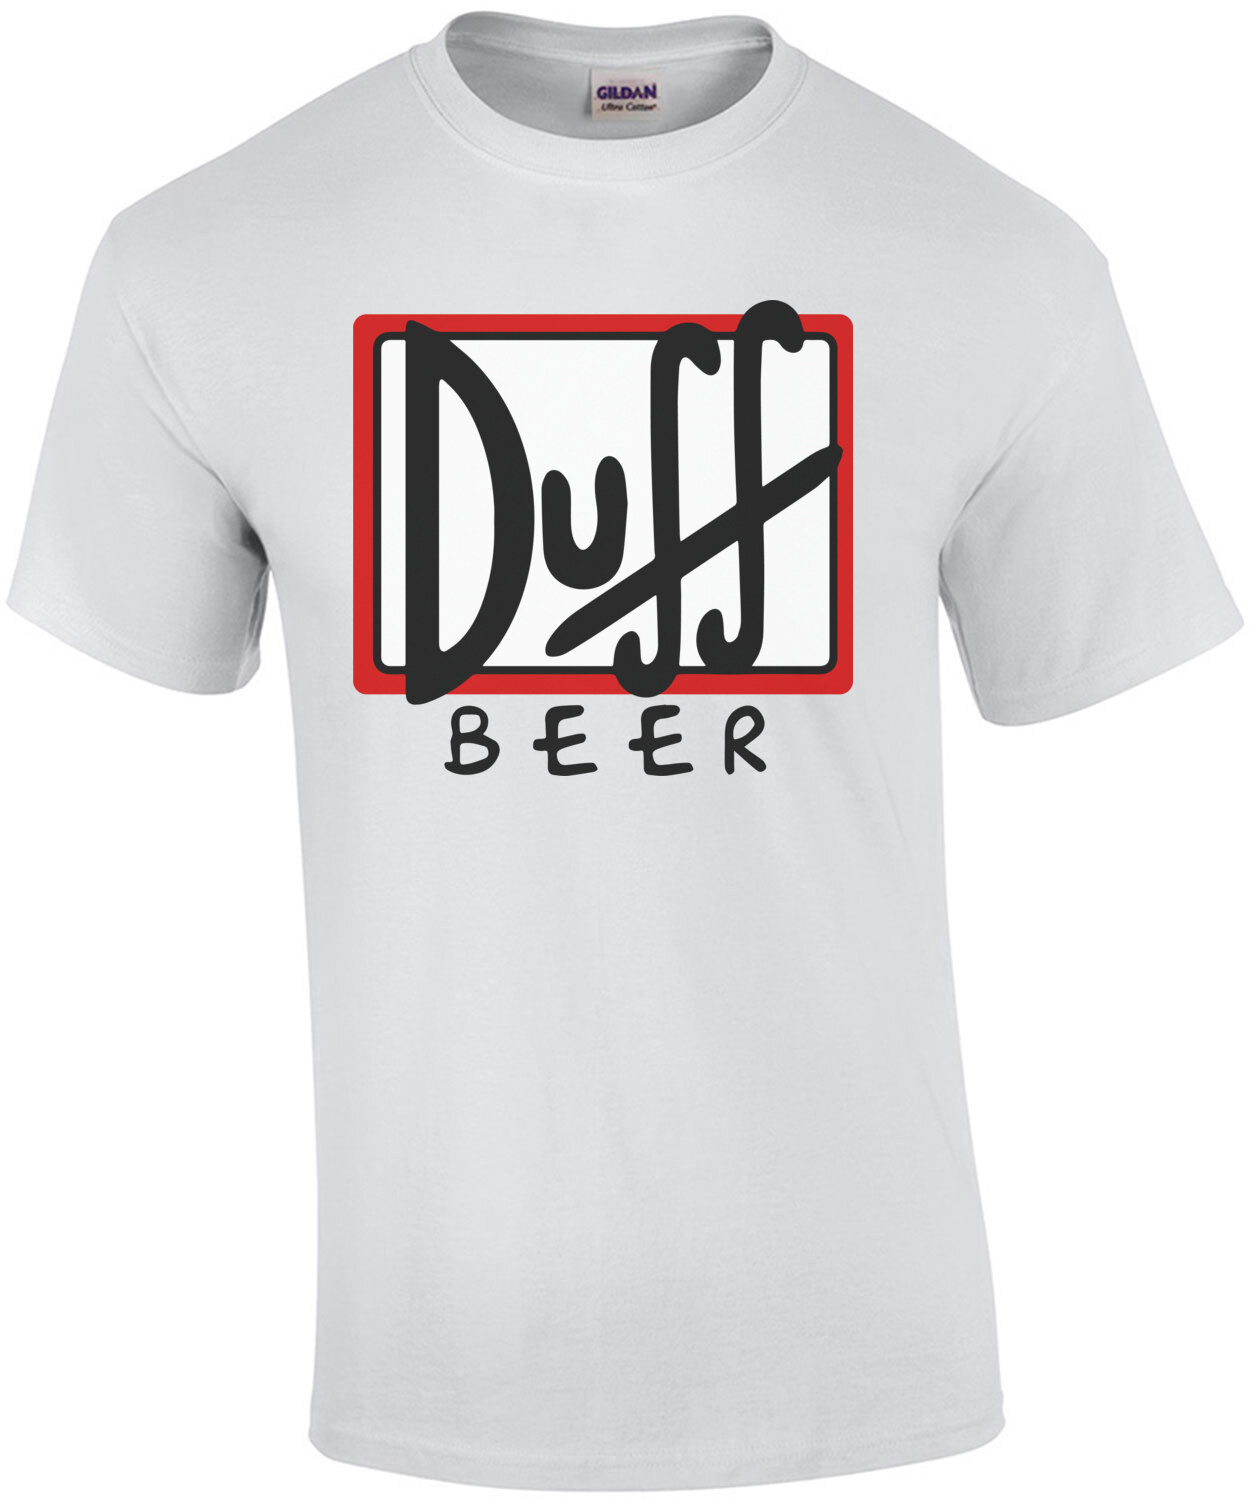 Duff Beer - The Simpsons - 90's T-Shirt